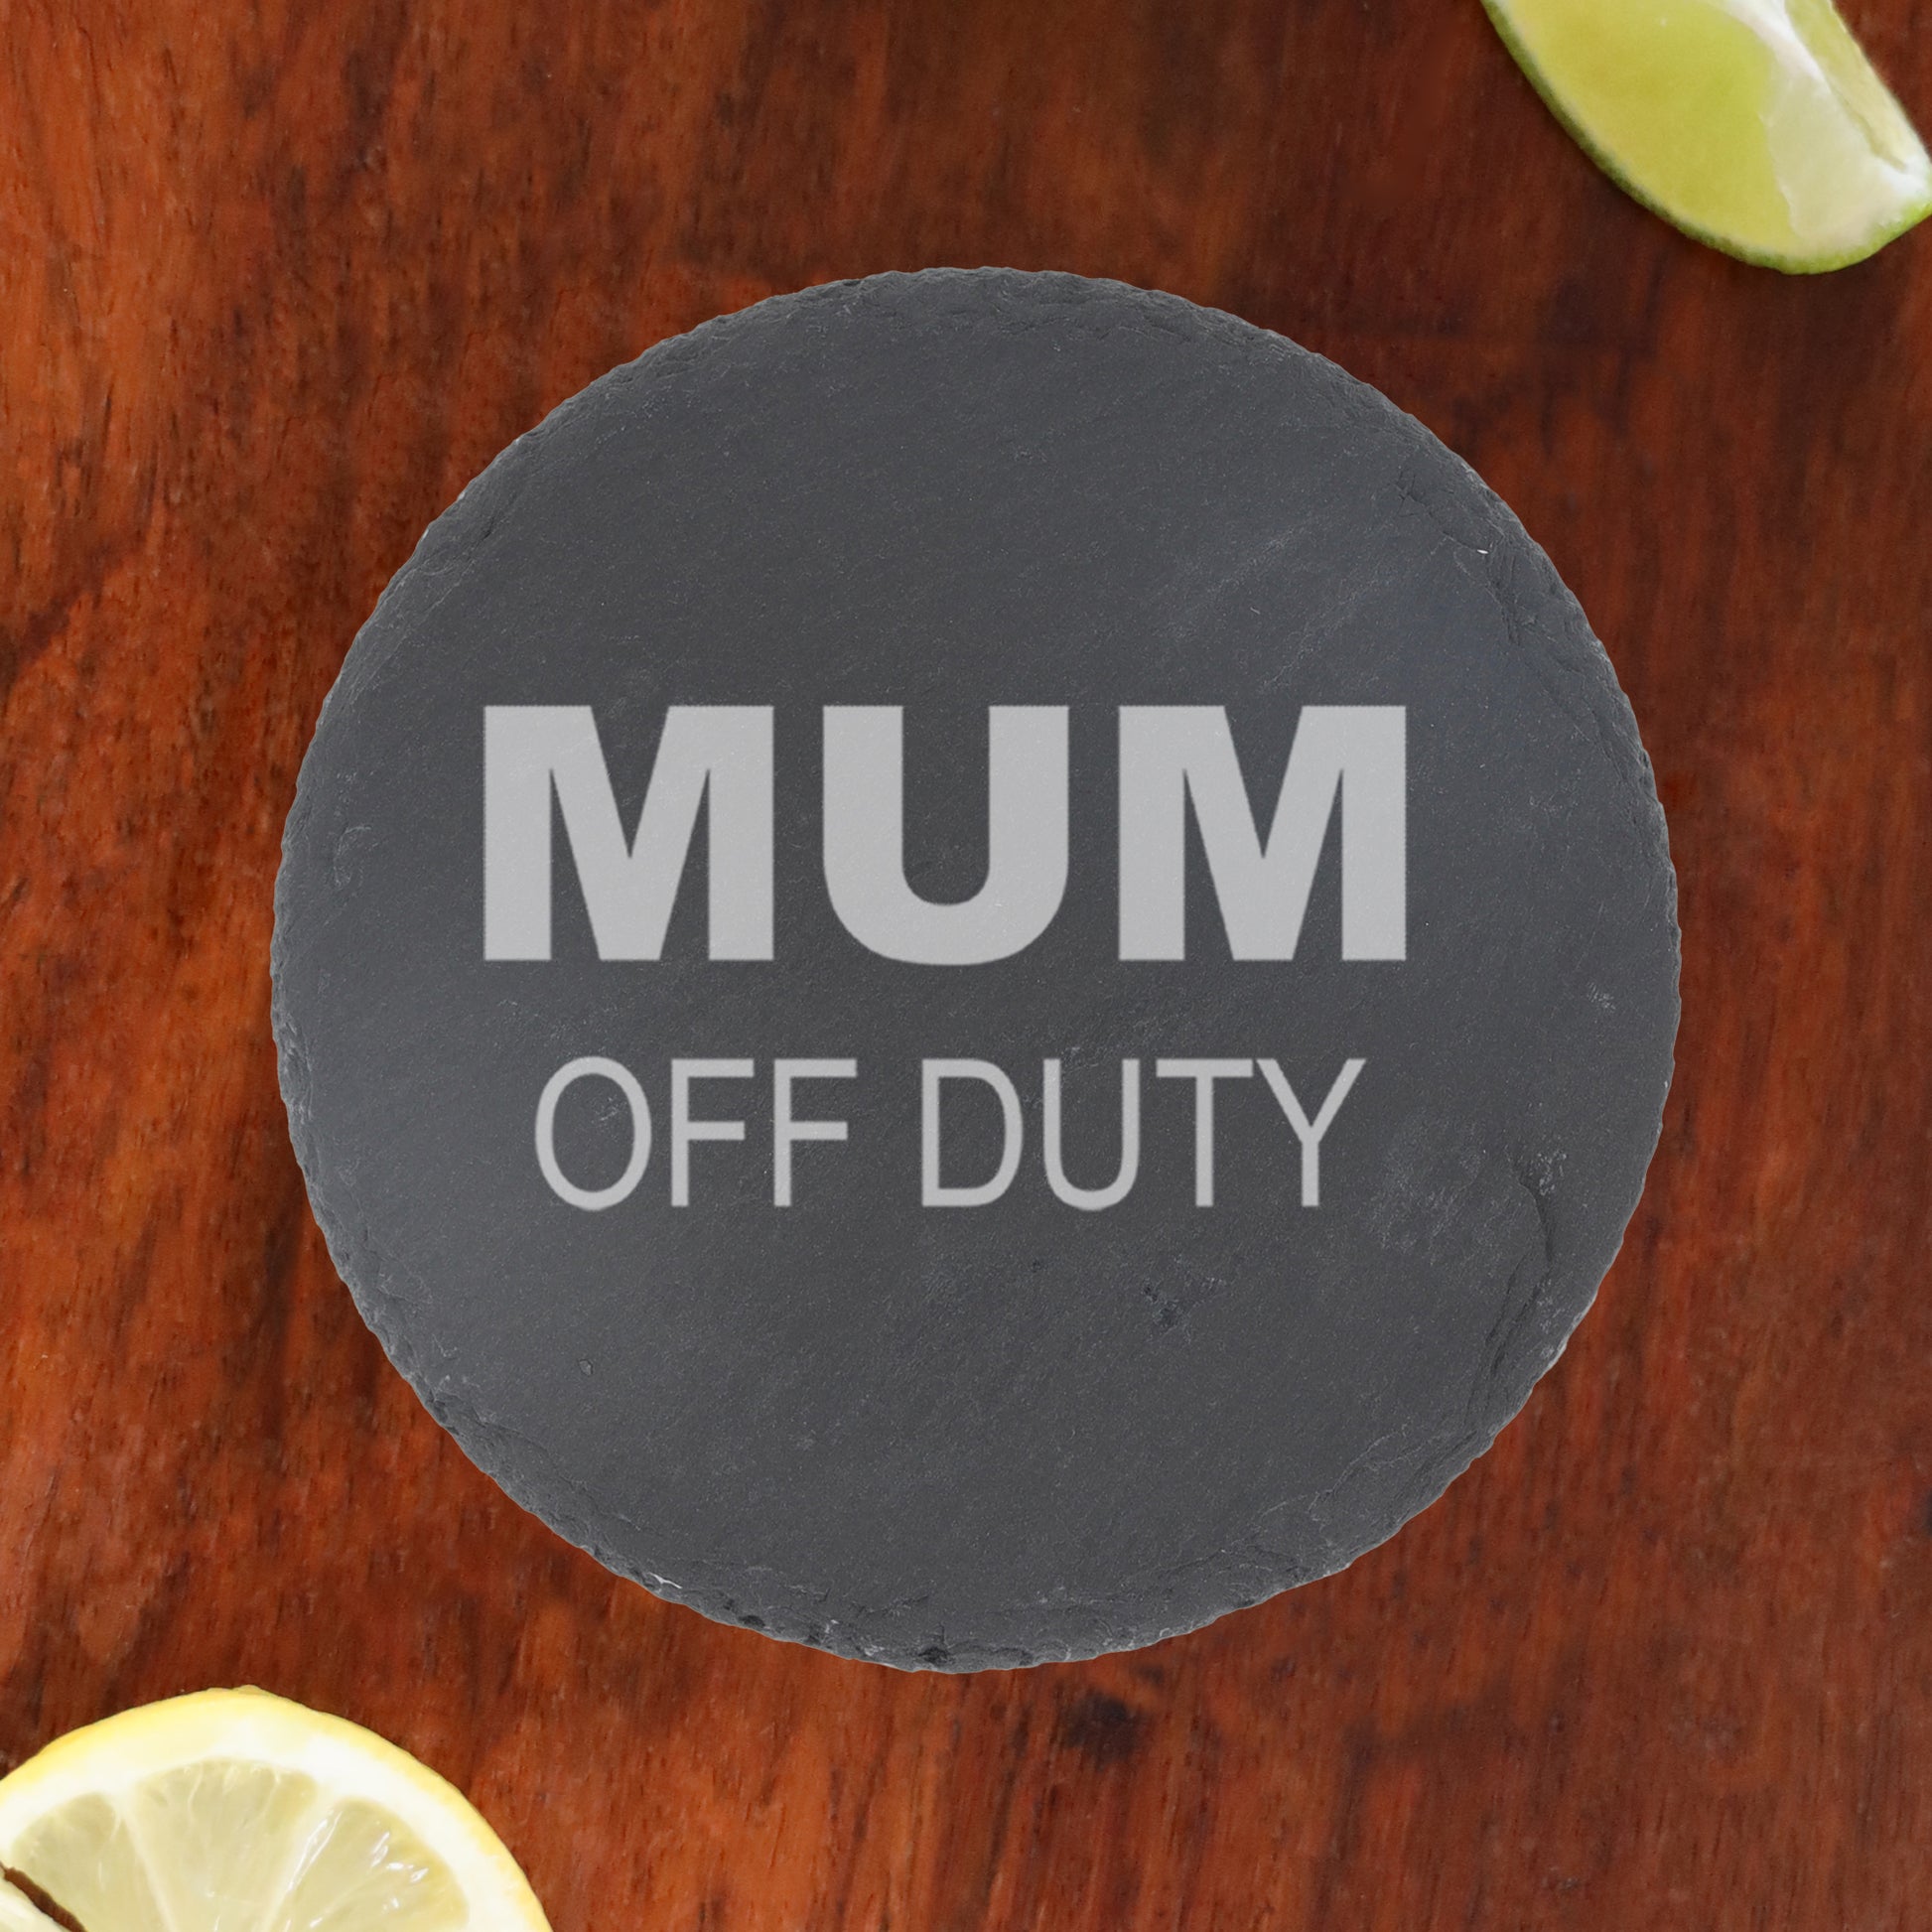 Engraved "Mum Off Duty" Novelty Whisky Glass and/or Coaster Set  - Always Looking Good - Round Coaster Only  